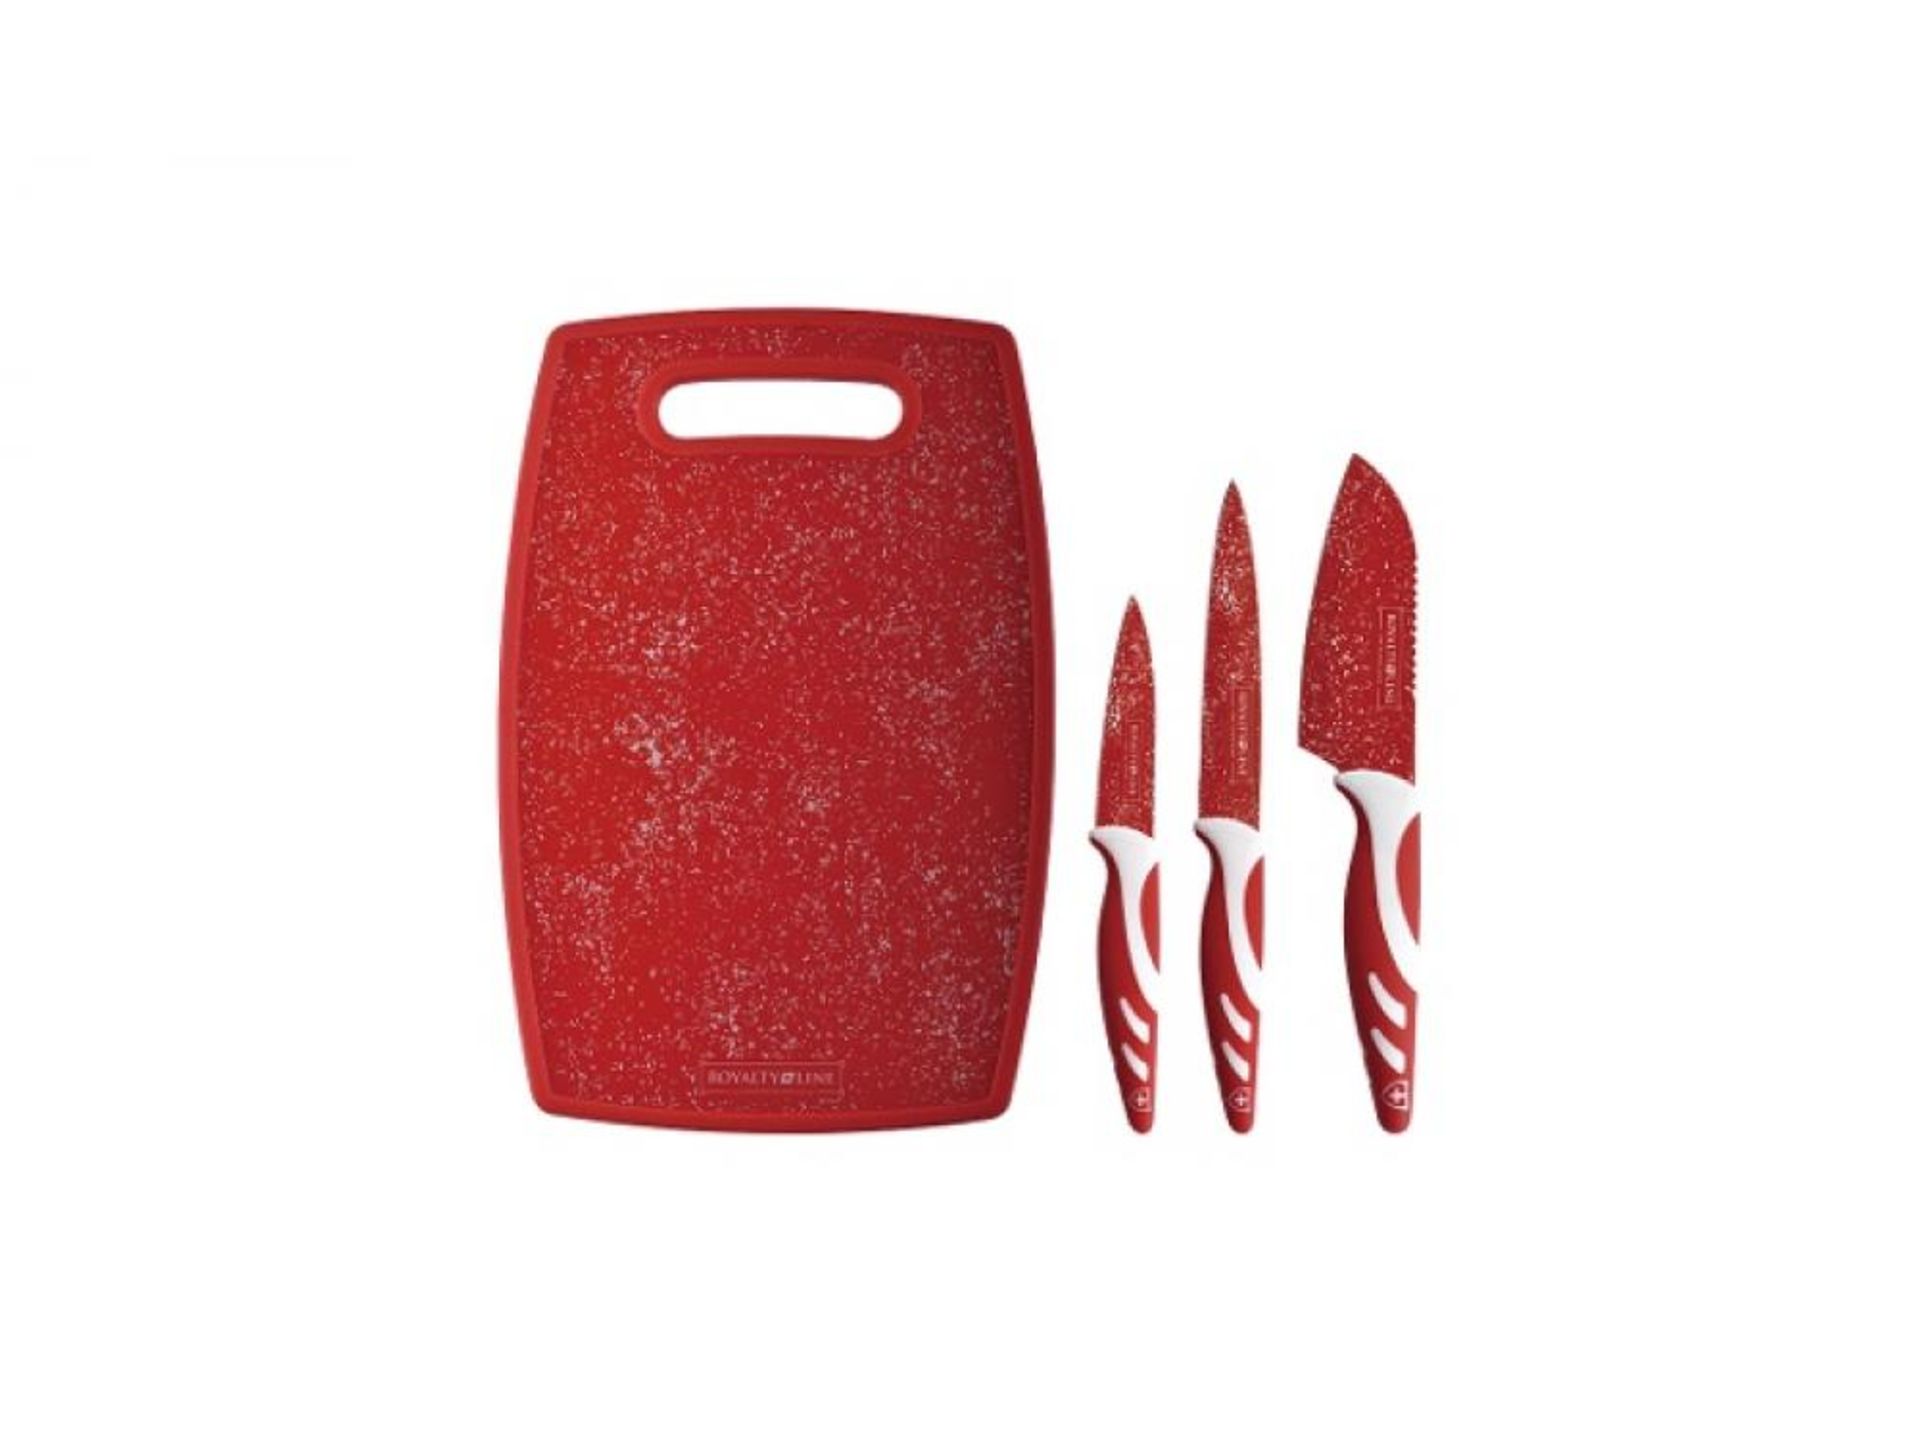 V  Grade A Royalty Line Four Piece Anti Bacterial Knife Set QWith Cutting Board (Red) RRP 89 Euros